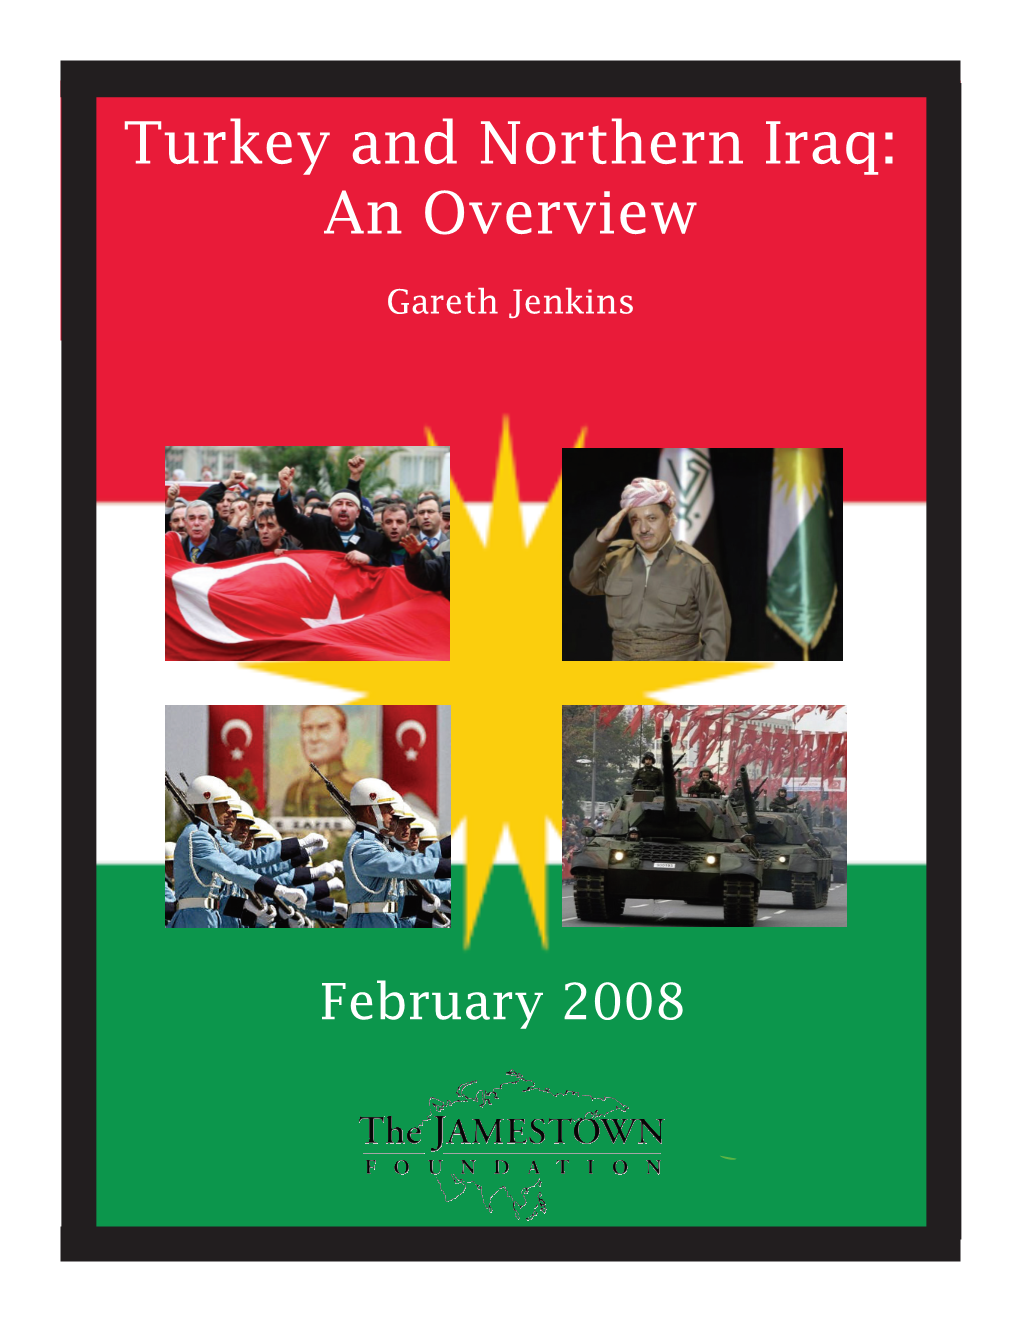 Turkey and Northern Iraq: an Overview